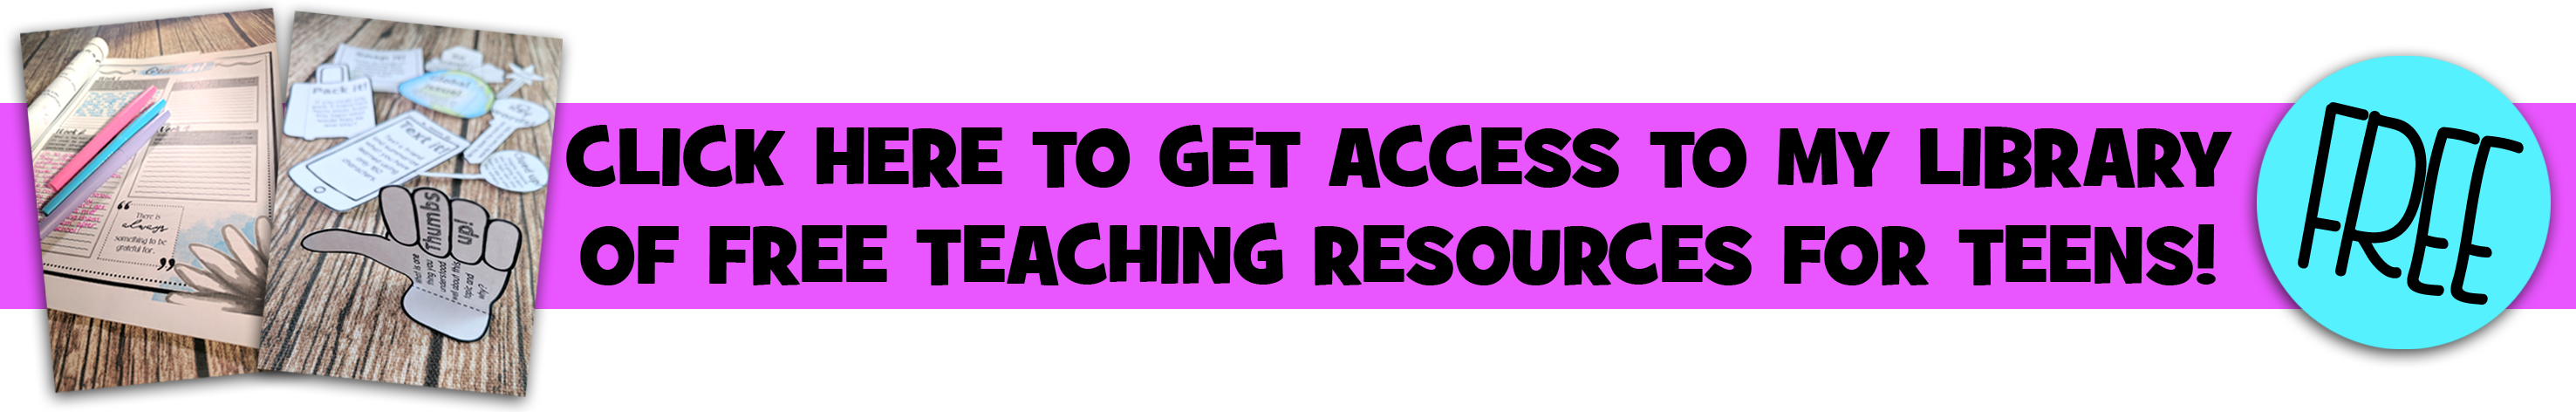 Free teaching resources for teens! @resourceforce